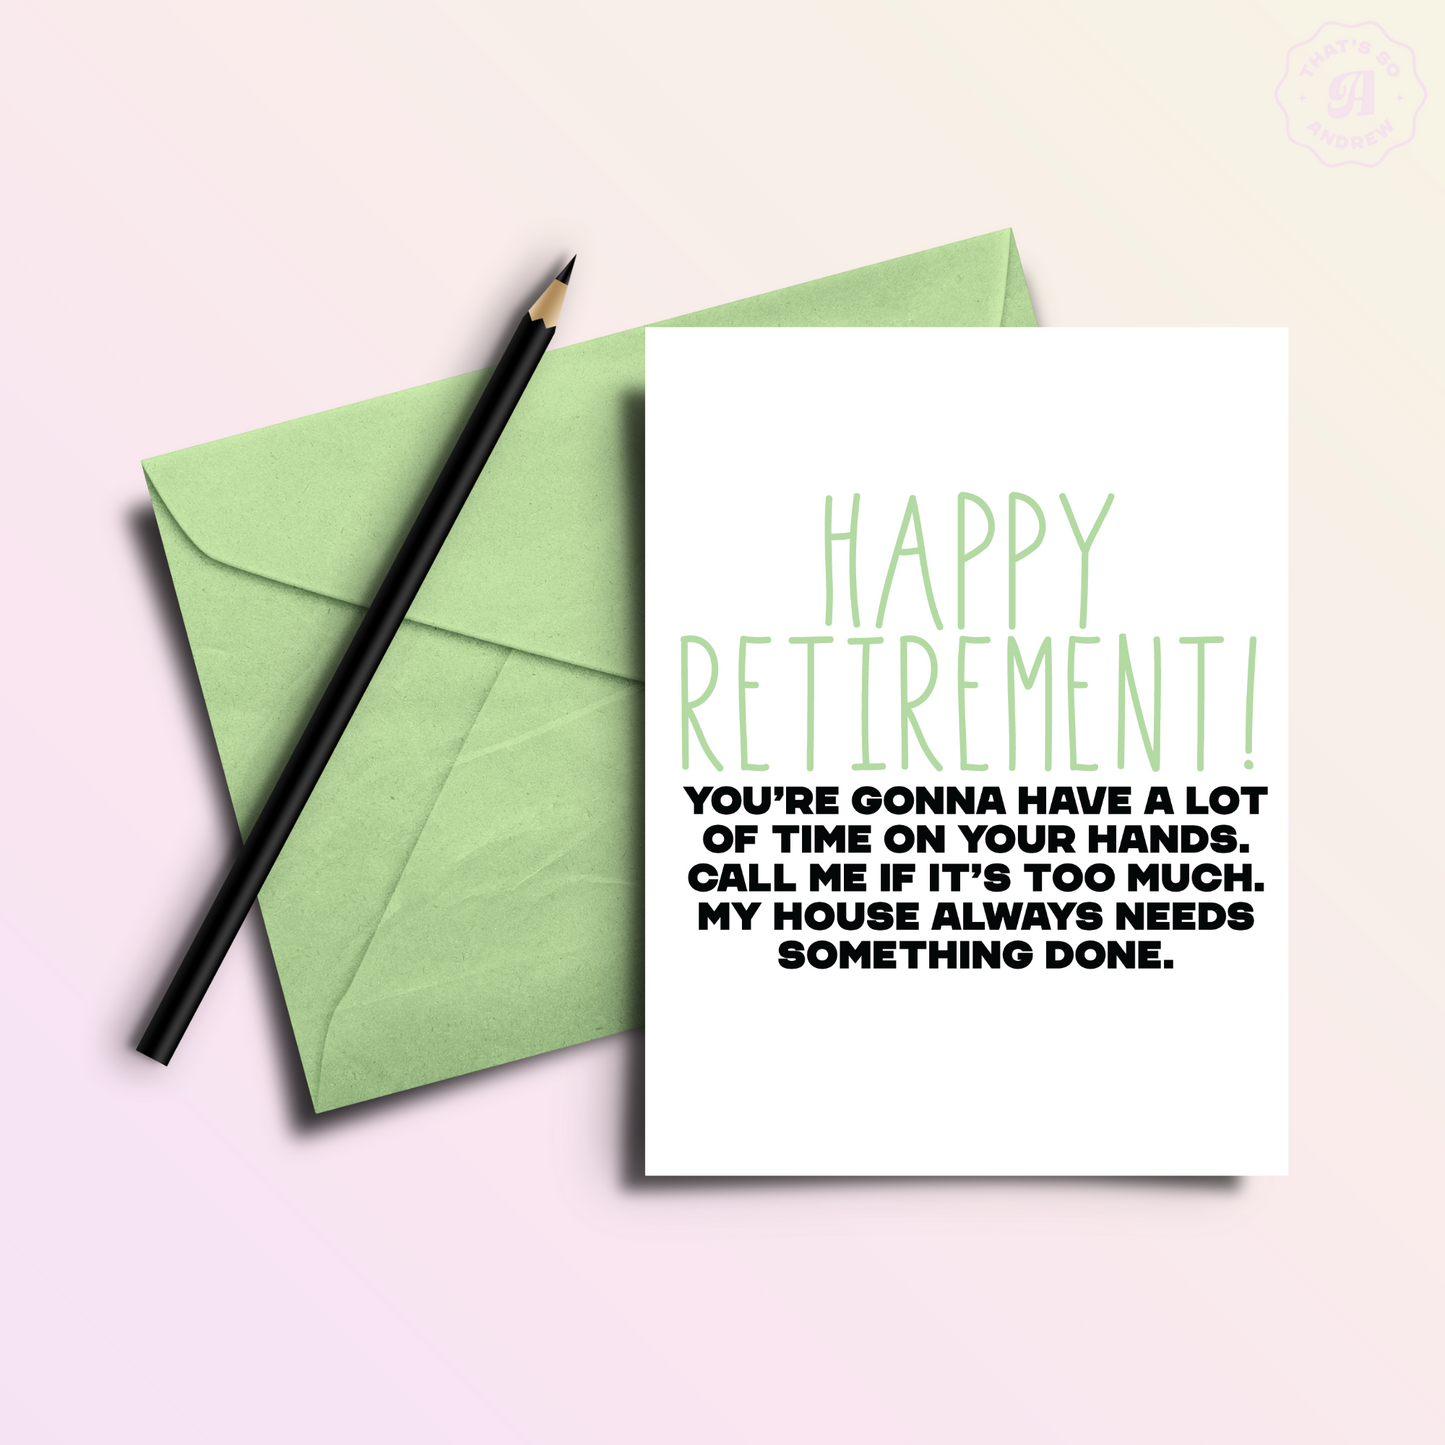 Call Me for Work | Funny Retirement Greeting Card